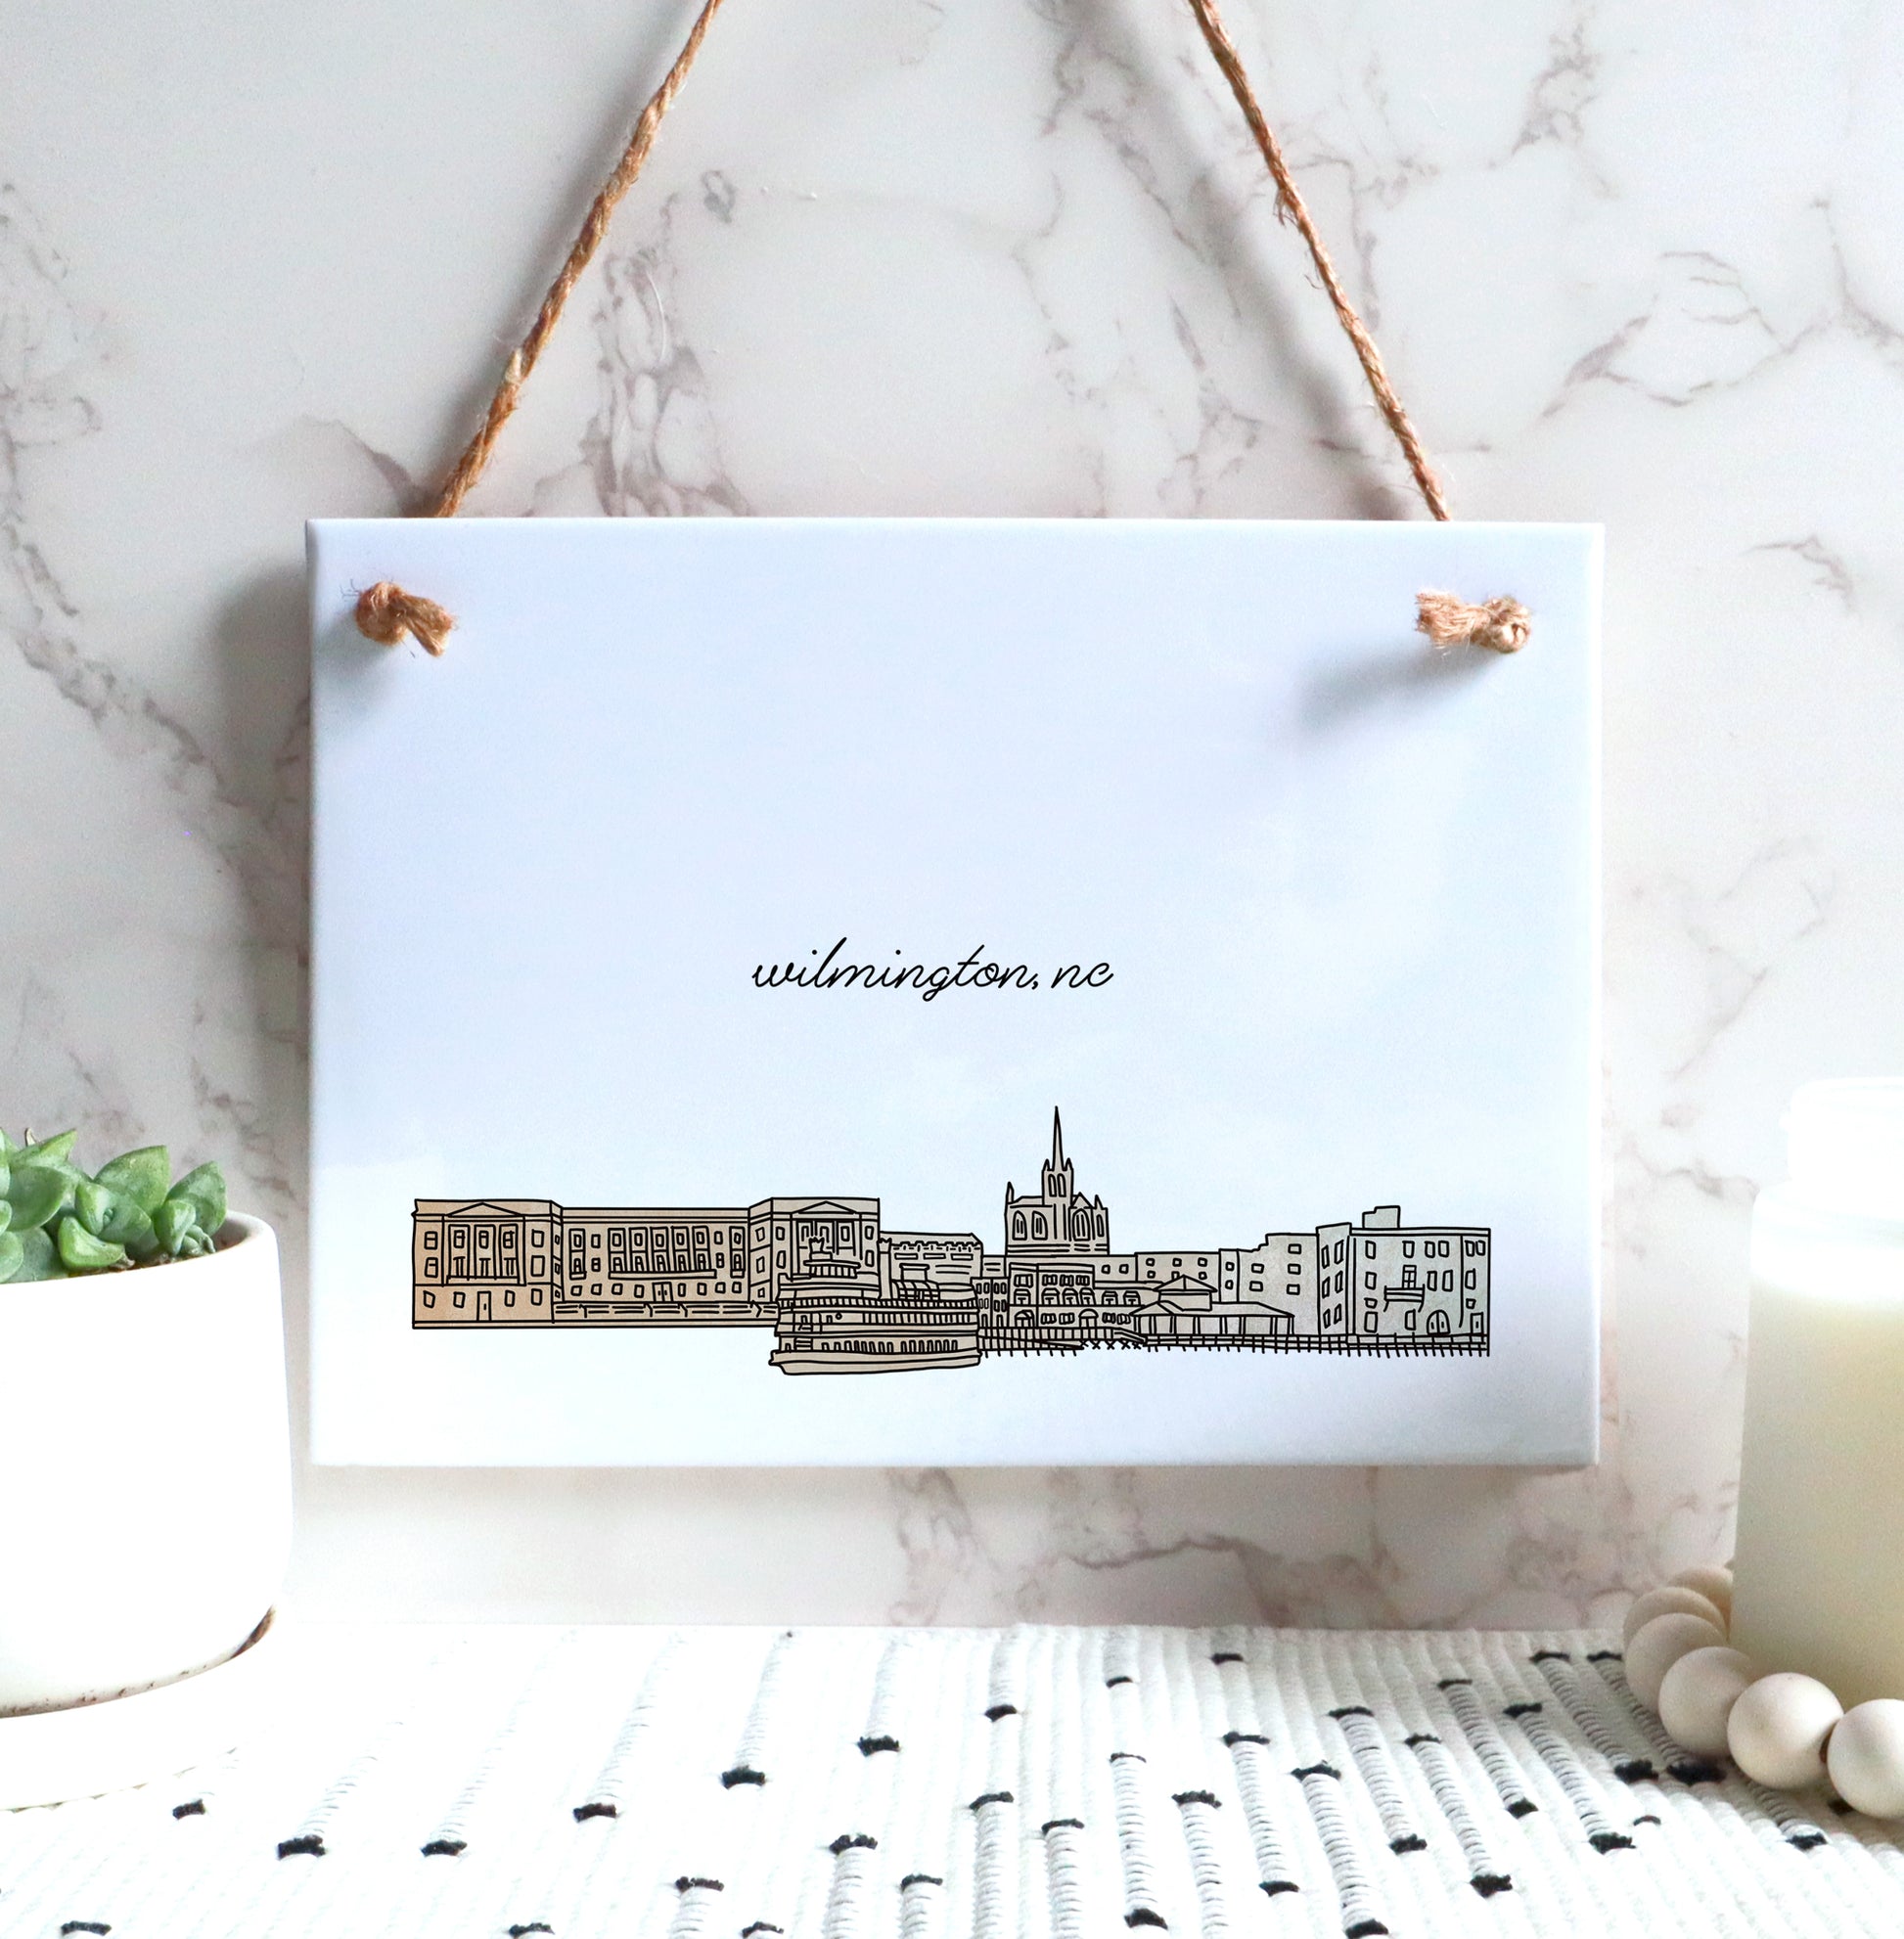 A Wilmington NC souvenir of a drawing of the city skyline on a rectangle tile sign, hanging on a wall - in the color beige